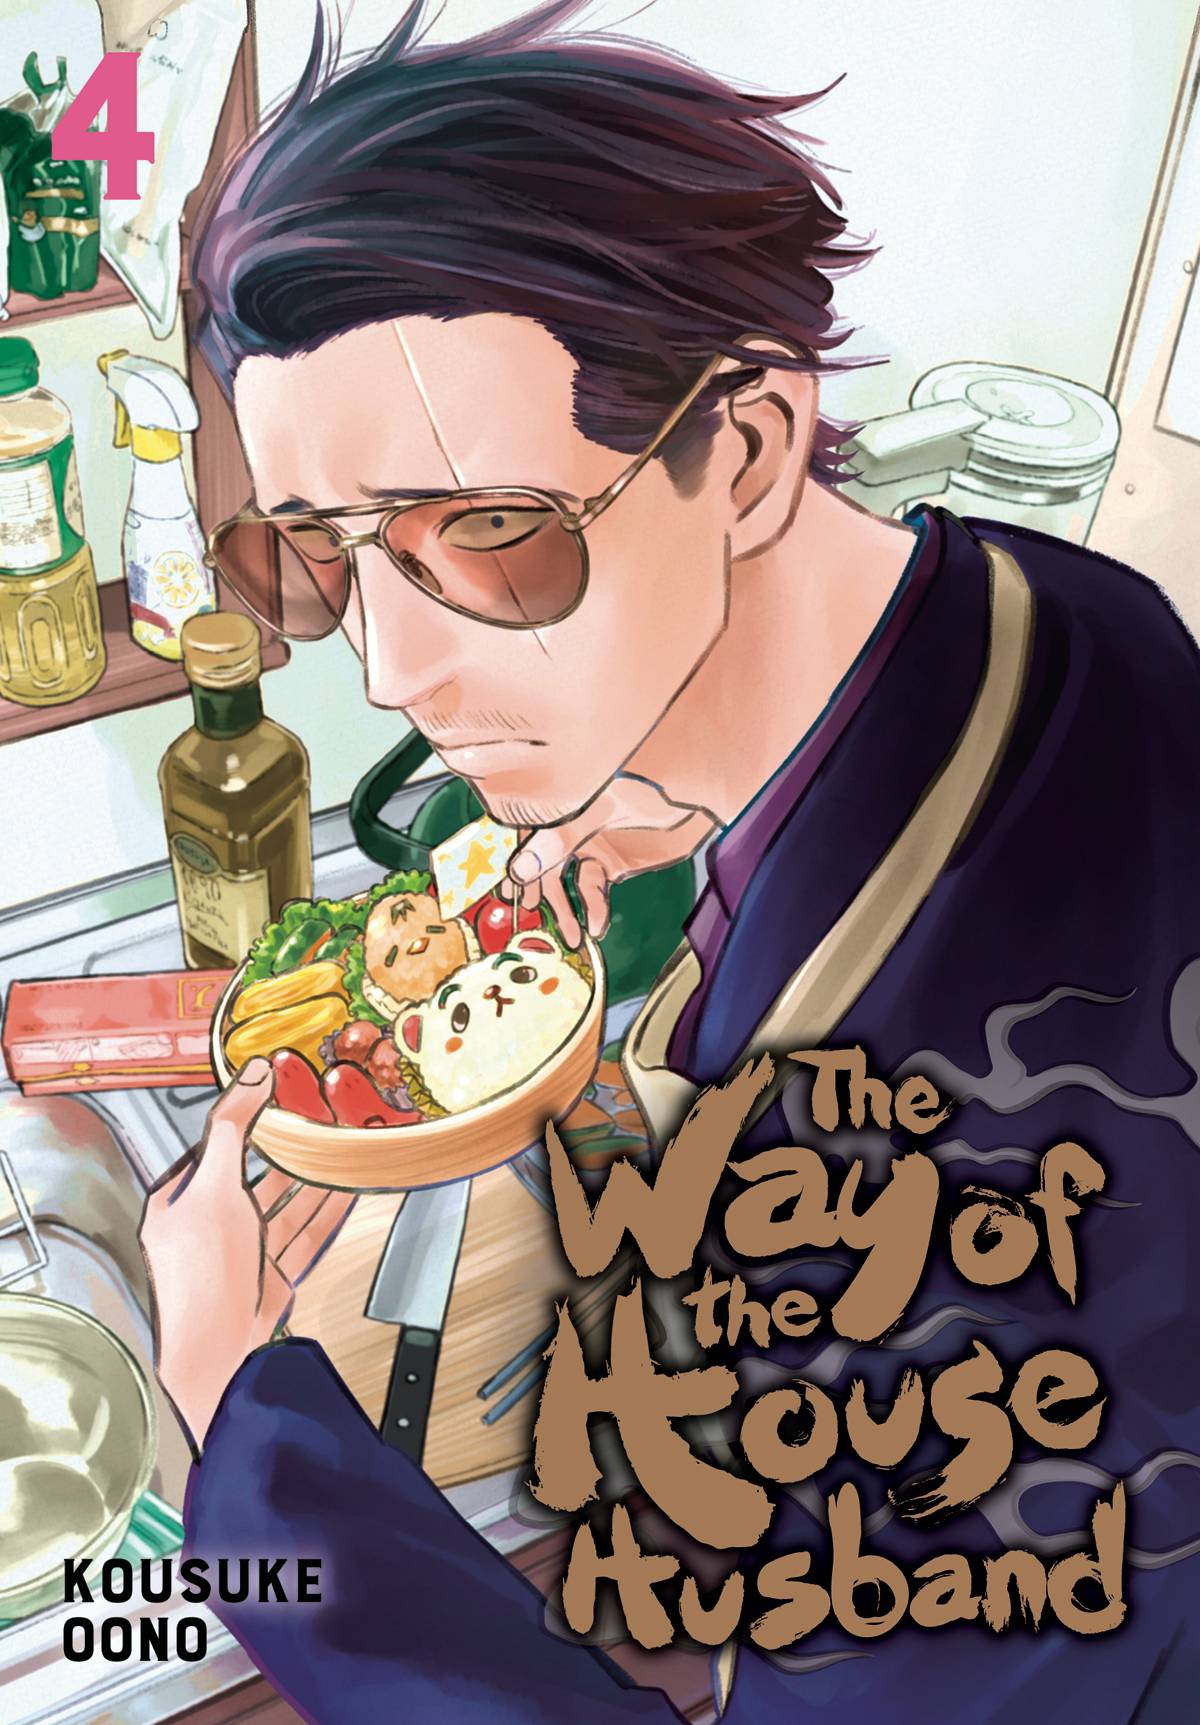 Way Of The Househusband Vol. 04